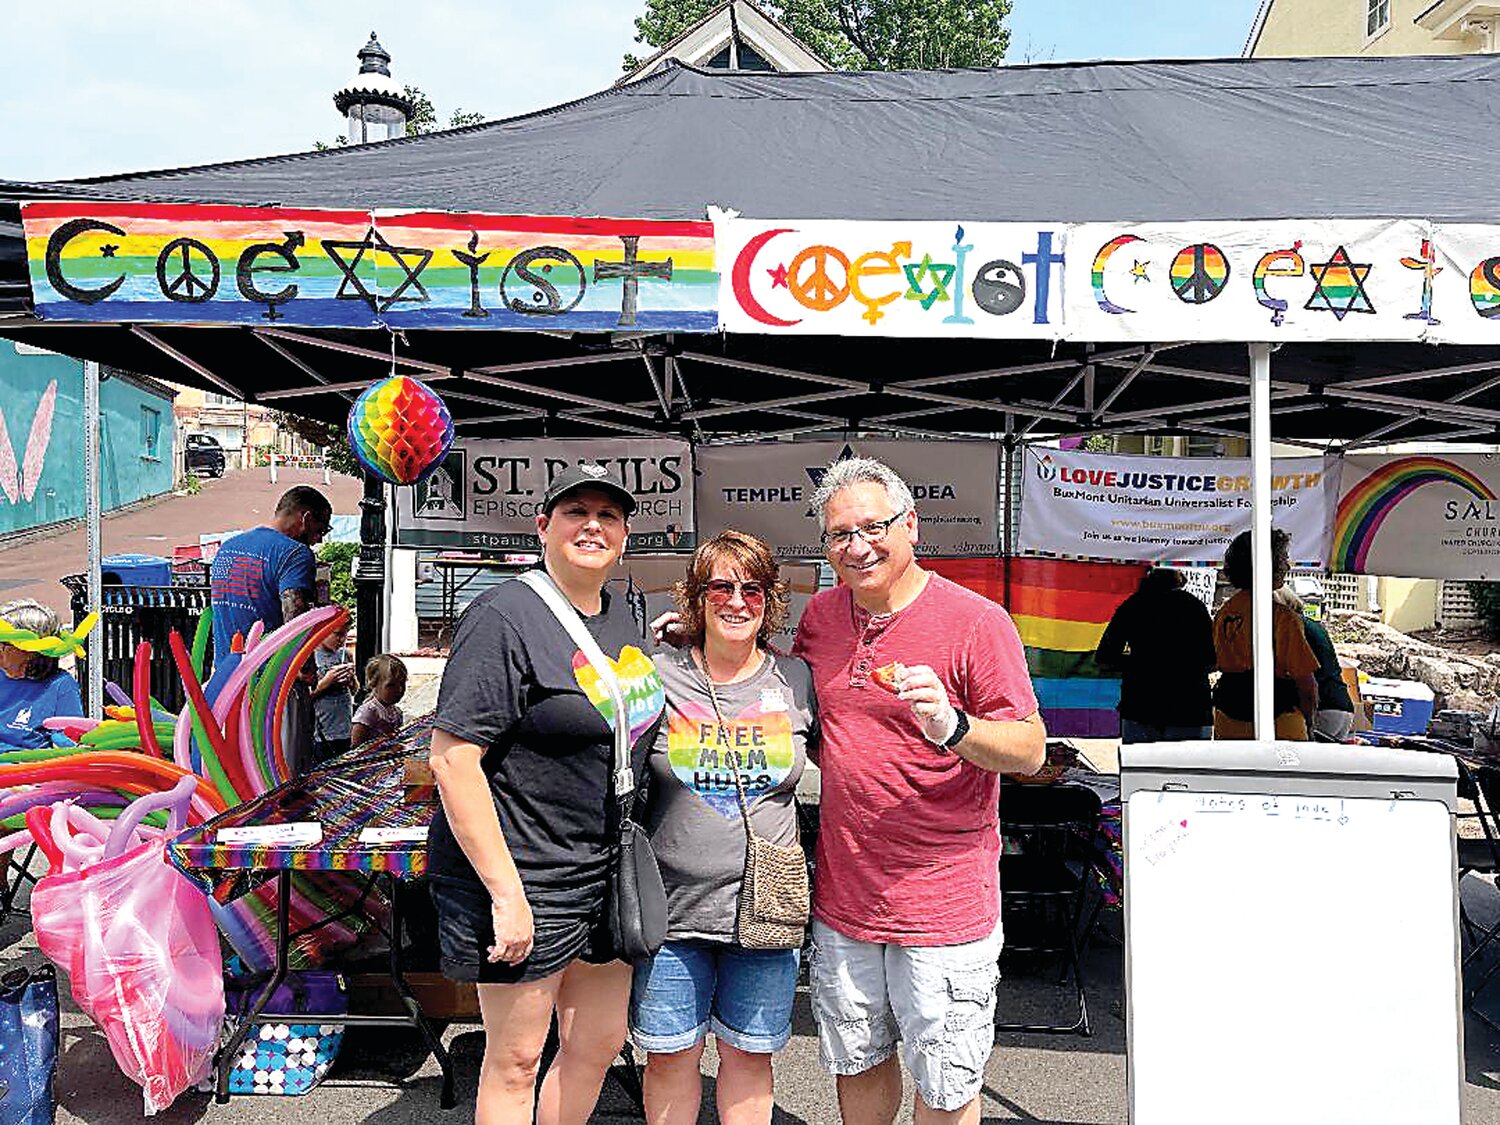 Becky Bernstein, Shari Wohl and Jerel Wohl of Temple Judea were on hand at the block party as part of a contingent from the Bucks County temple that handed out rainbow bagels with a schmear at the event.